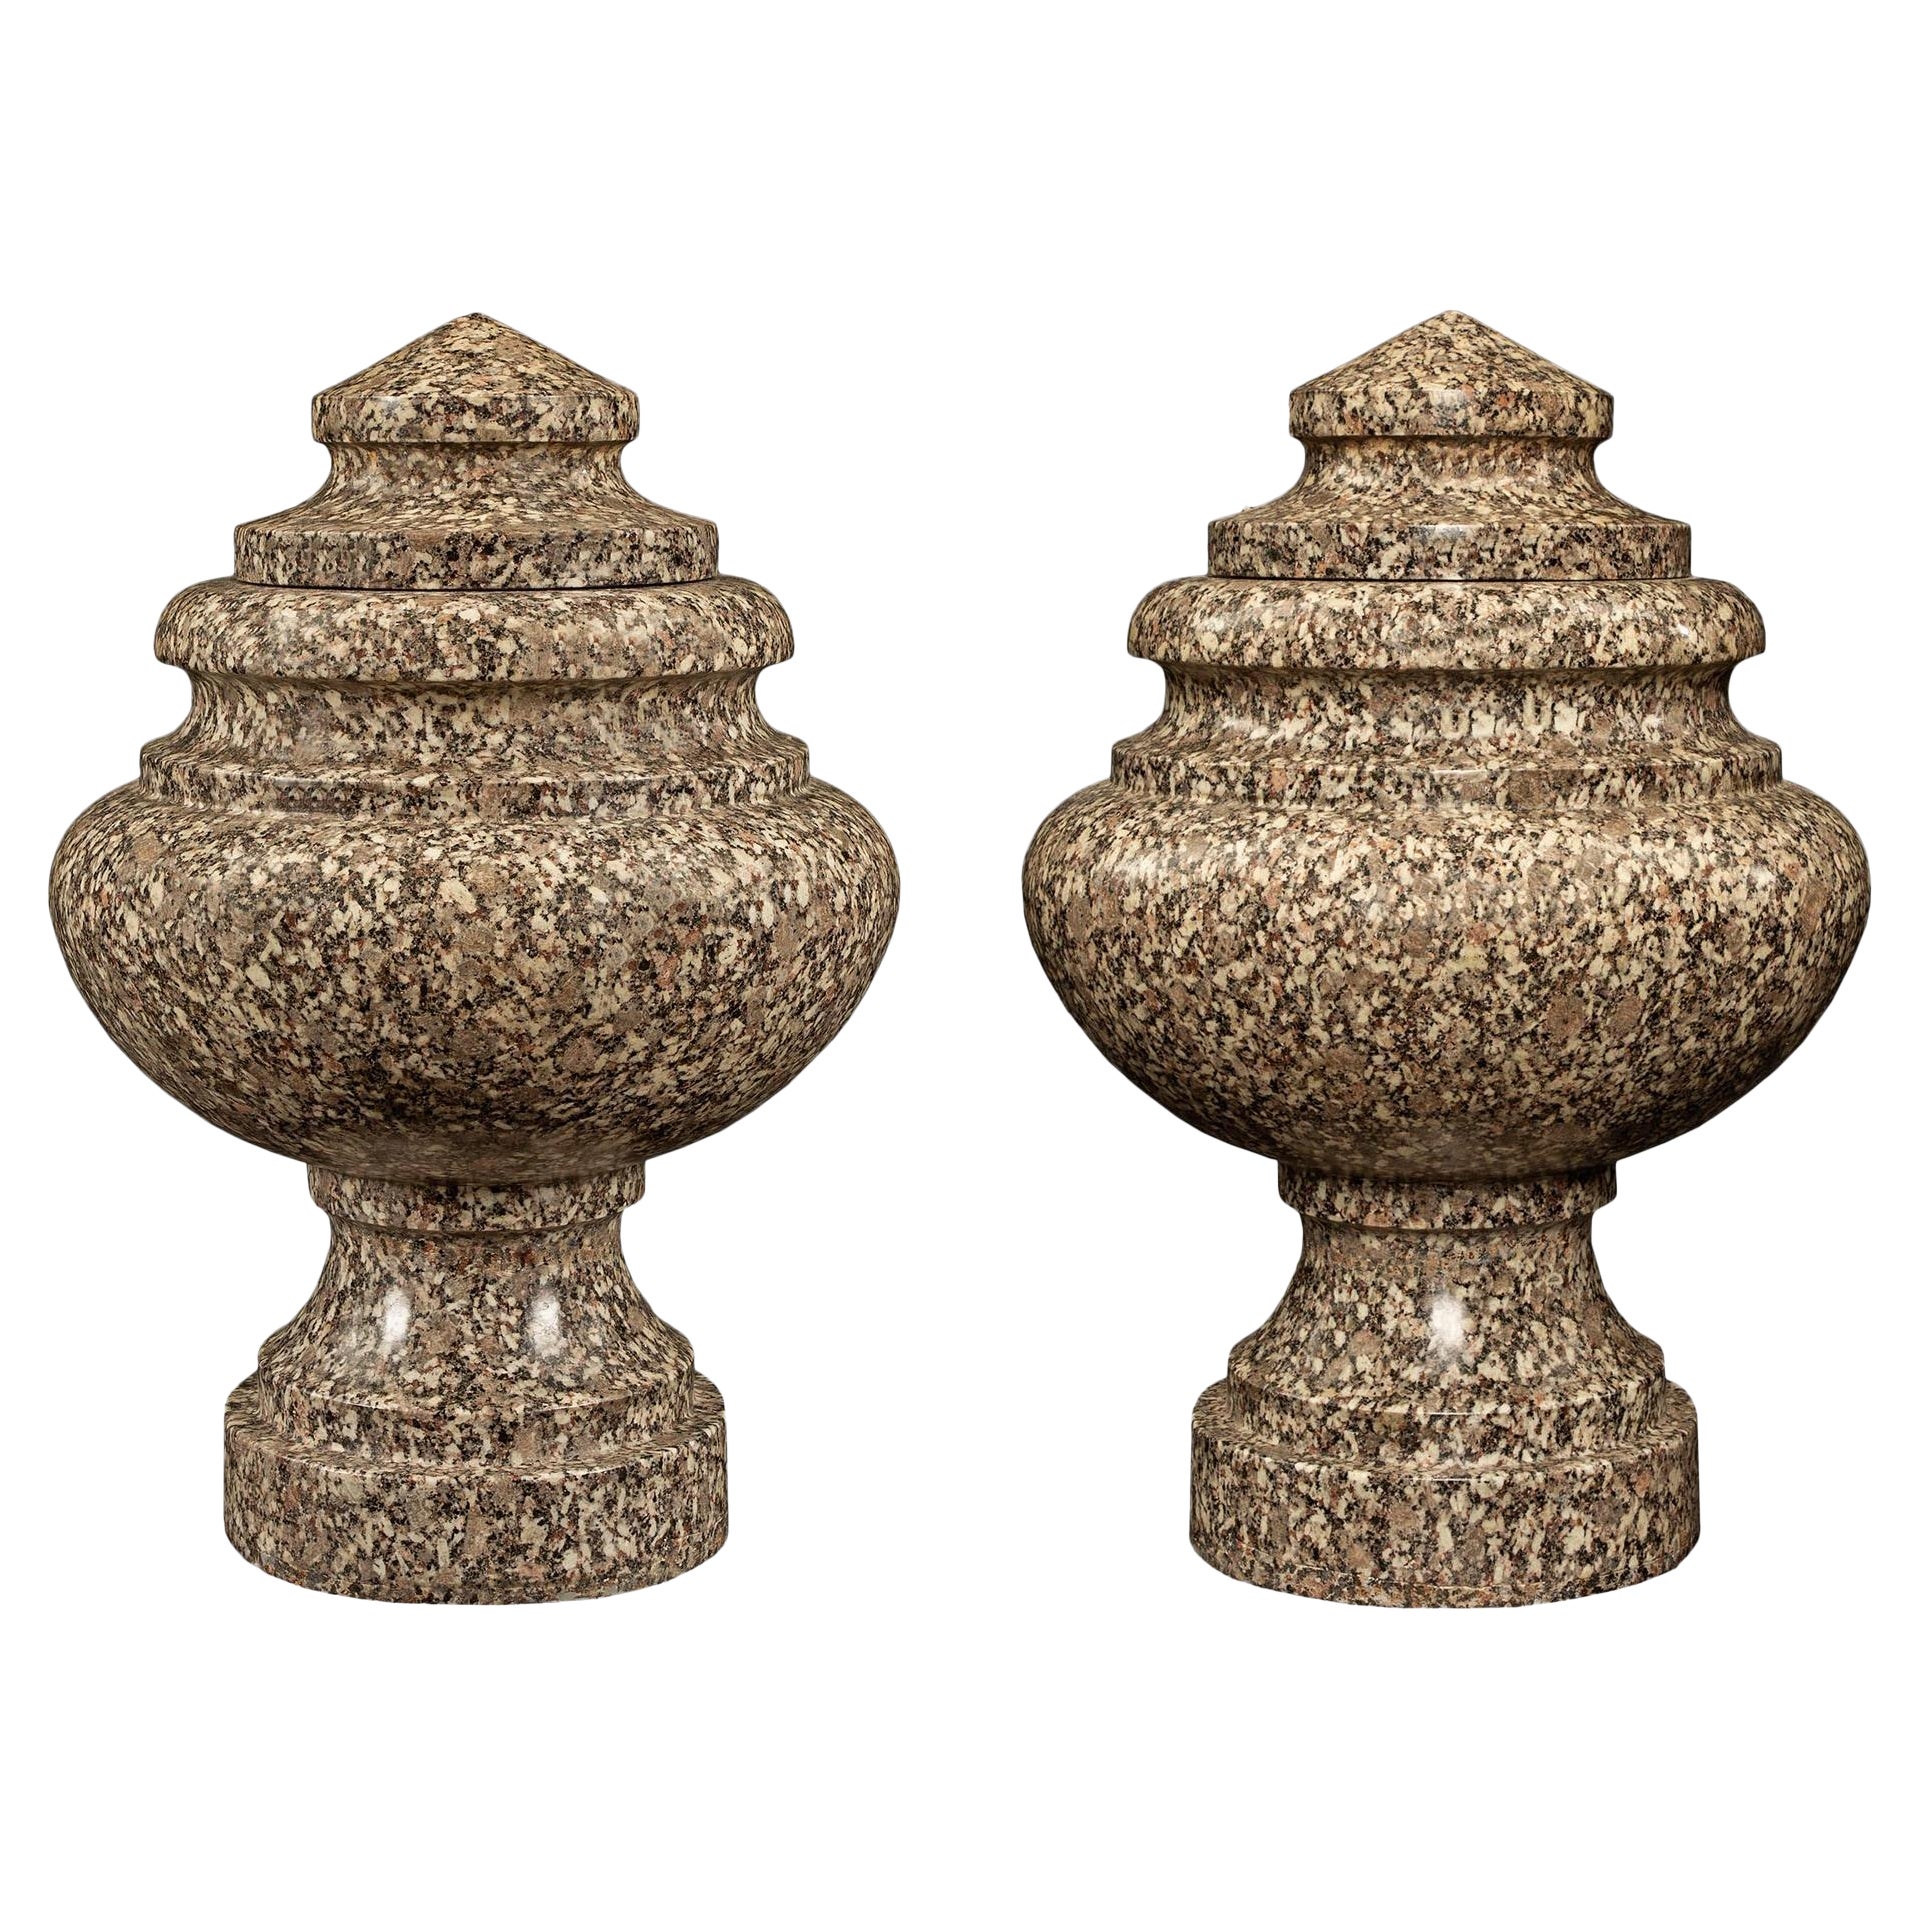 Pair of Italian 19th Century Neo-Classical St. Granite Lidded Urns For Sale